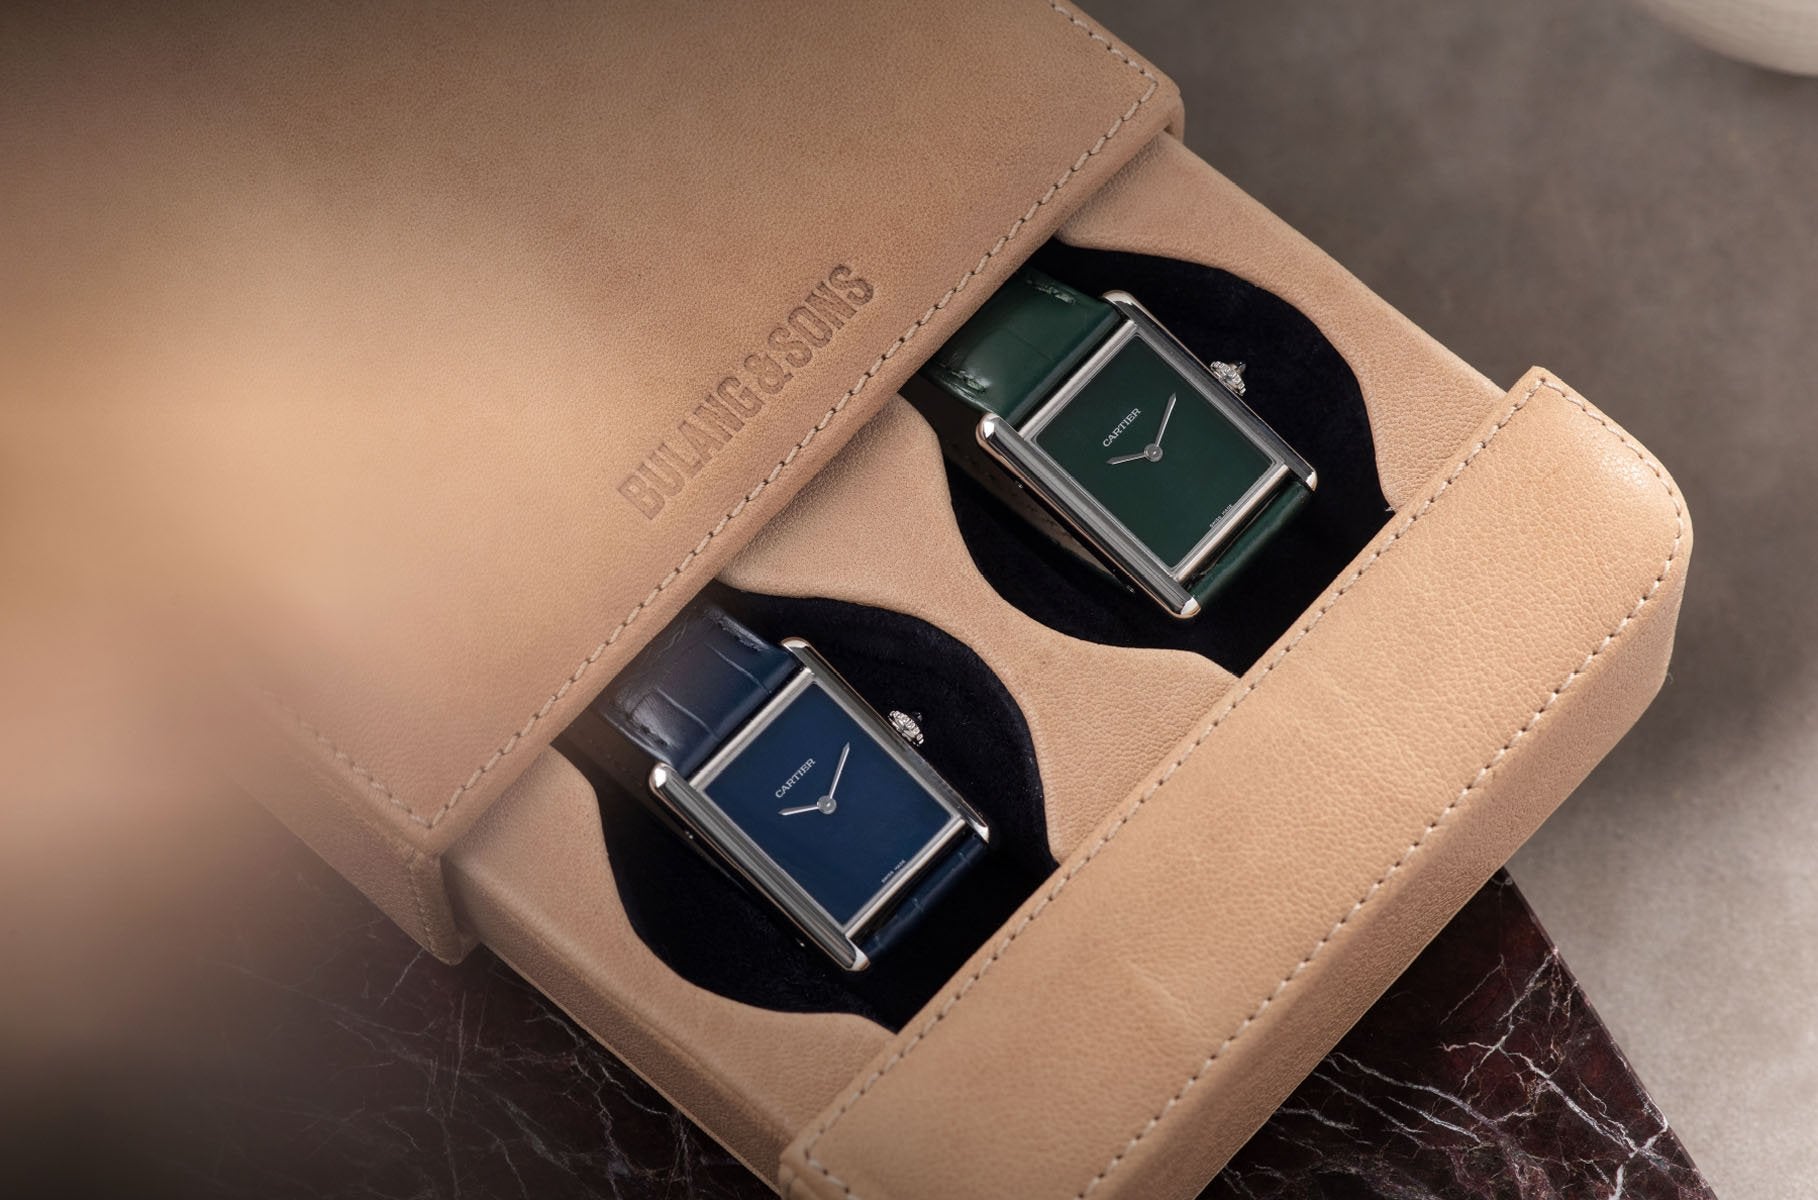 The Must de Cartier Tank – Then and Now